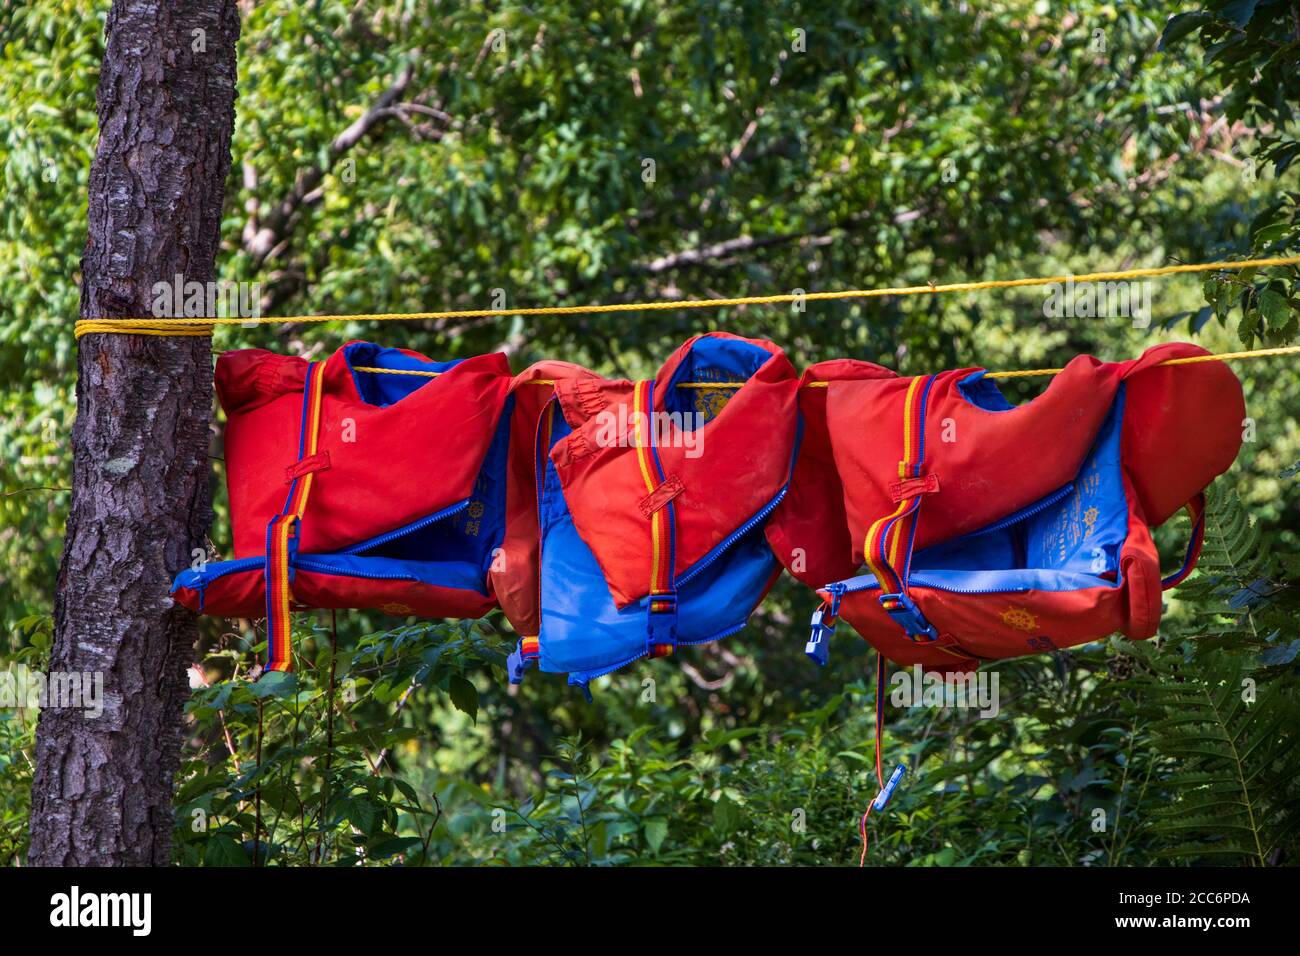 Three Kids Life jakets in a row drying on clothesline during summer season on a campsite in the woods (center align) Stock Photo